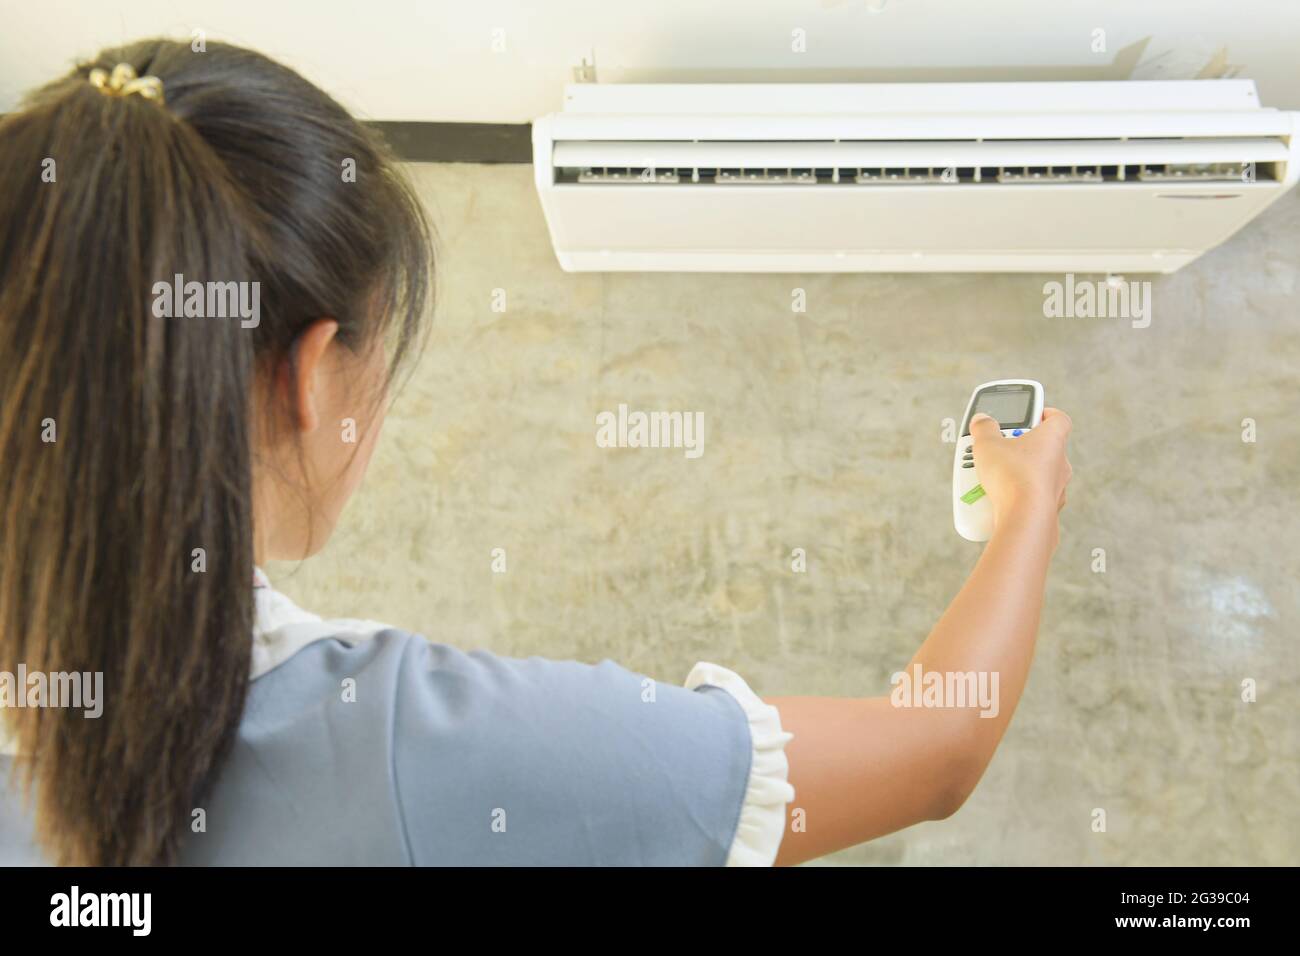 Hand with remote control directed on air conditioner Stock Photo